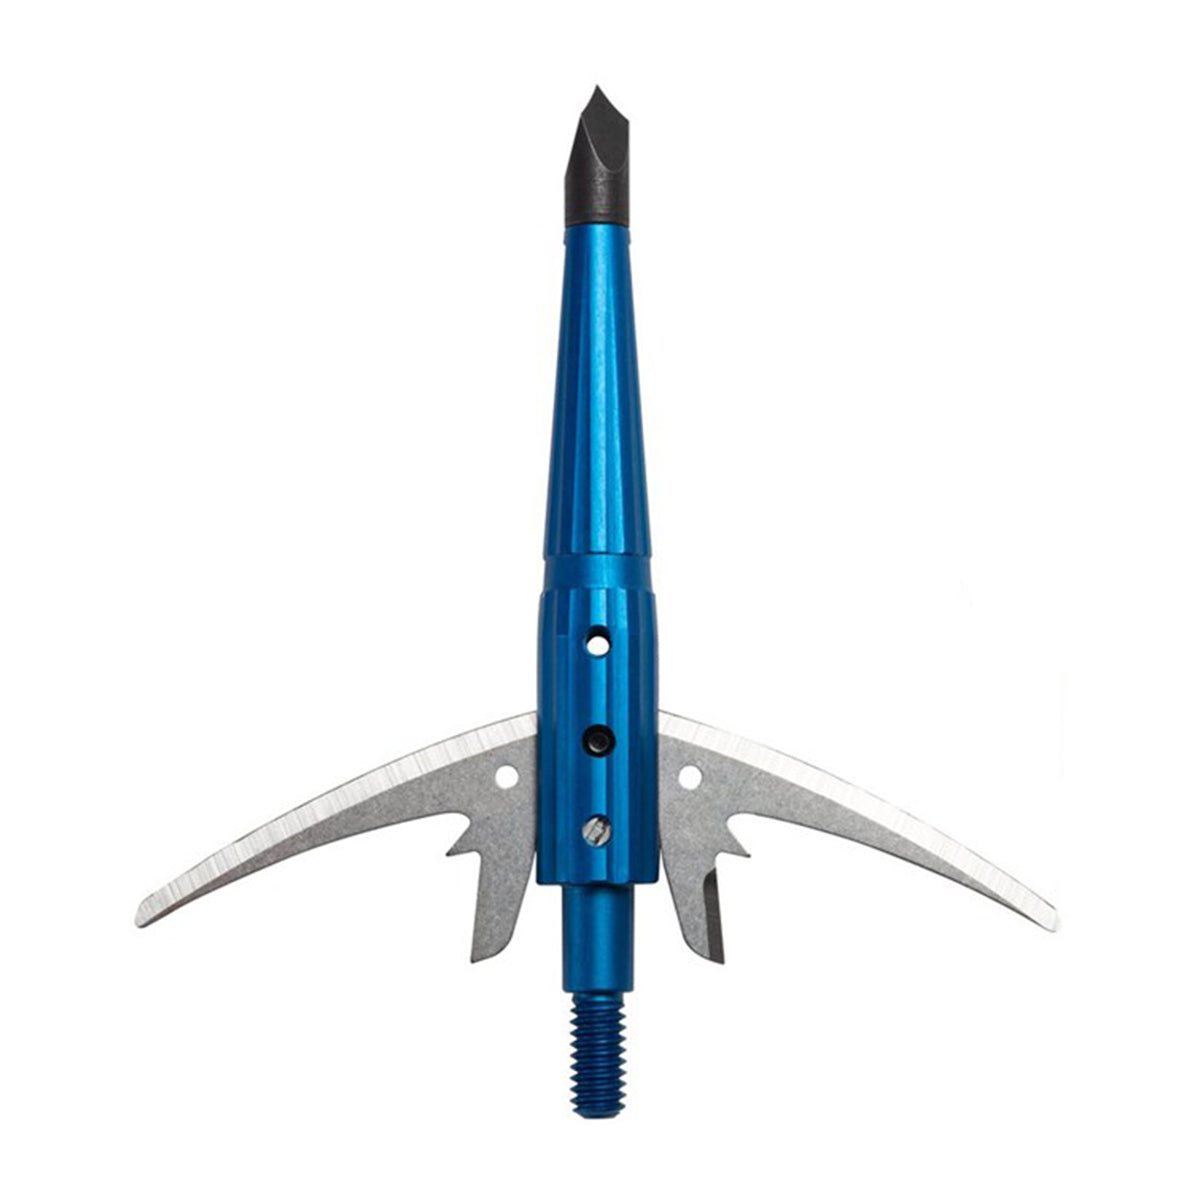 Swhacker Levi Morgan Signature Series #261 Broadheads in  by GOHUNT | Swhacker - GOHUNT Shop